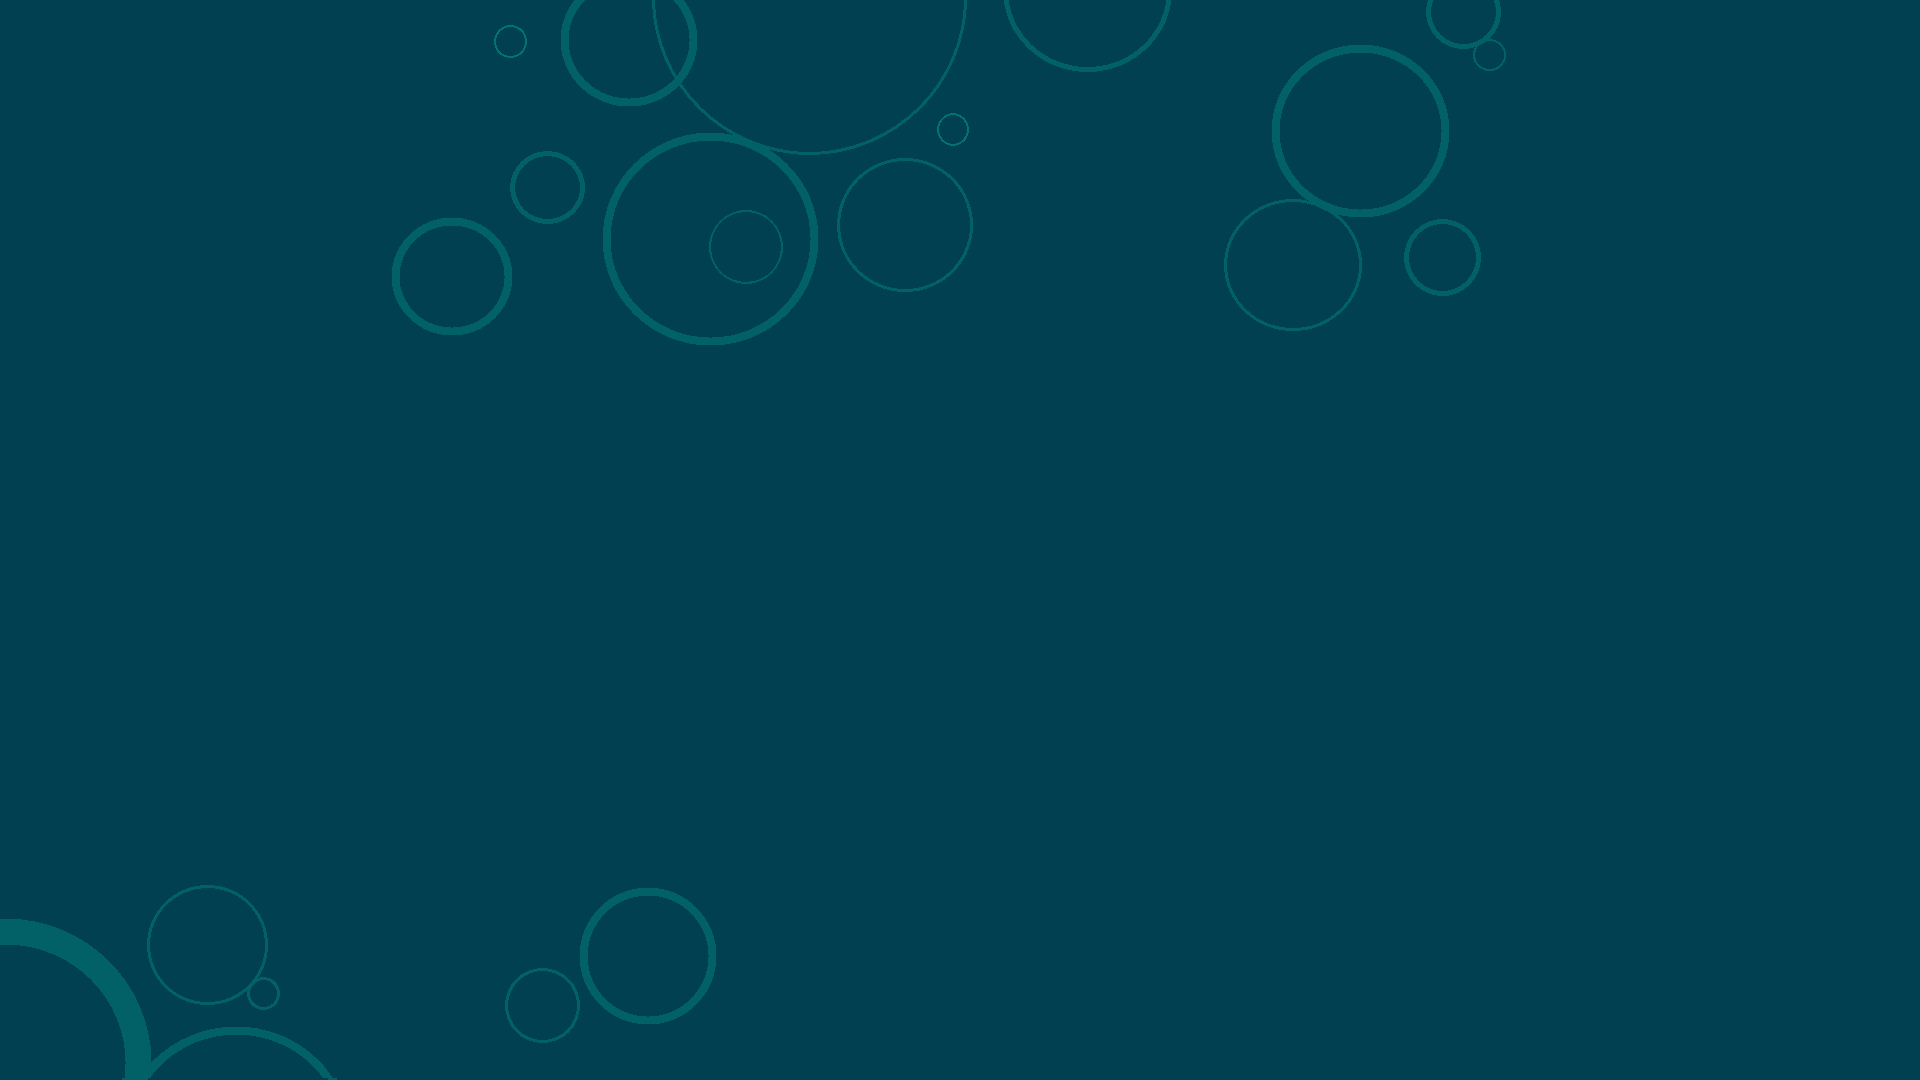 Dark Turquoise Windows Bubbles Background By Gifteddeviant On